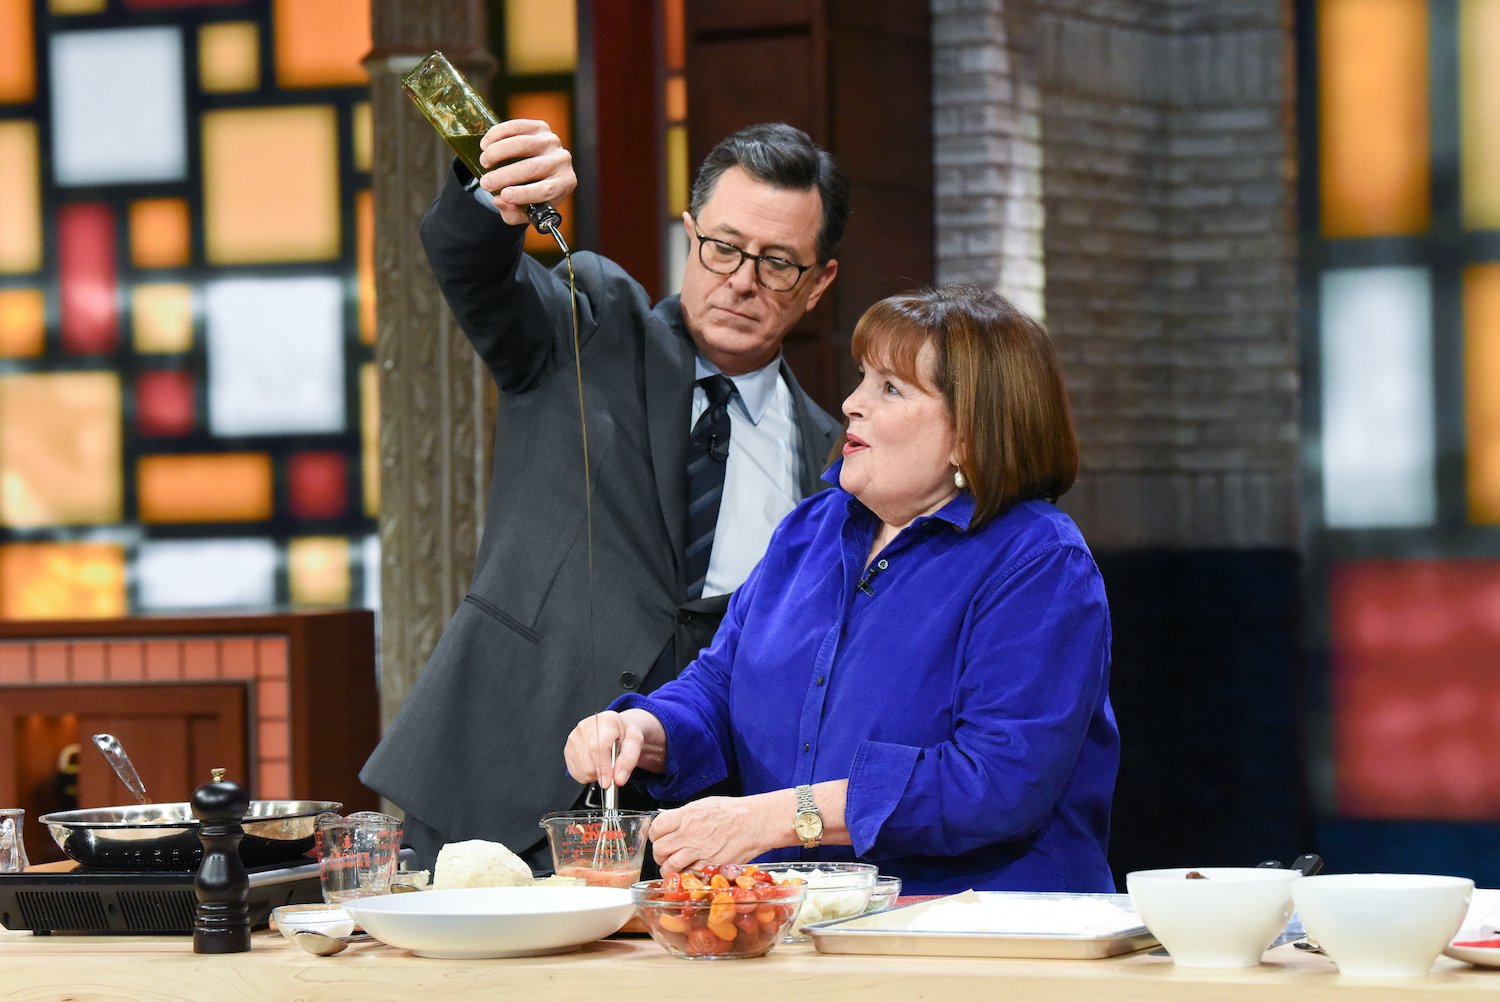 Ina Garten wears a blue shirt while cooking with Stephen Colbert on The Late Show